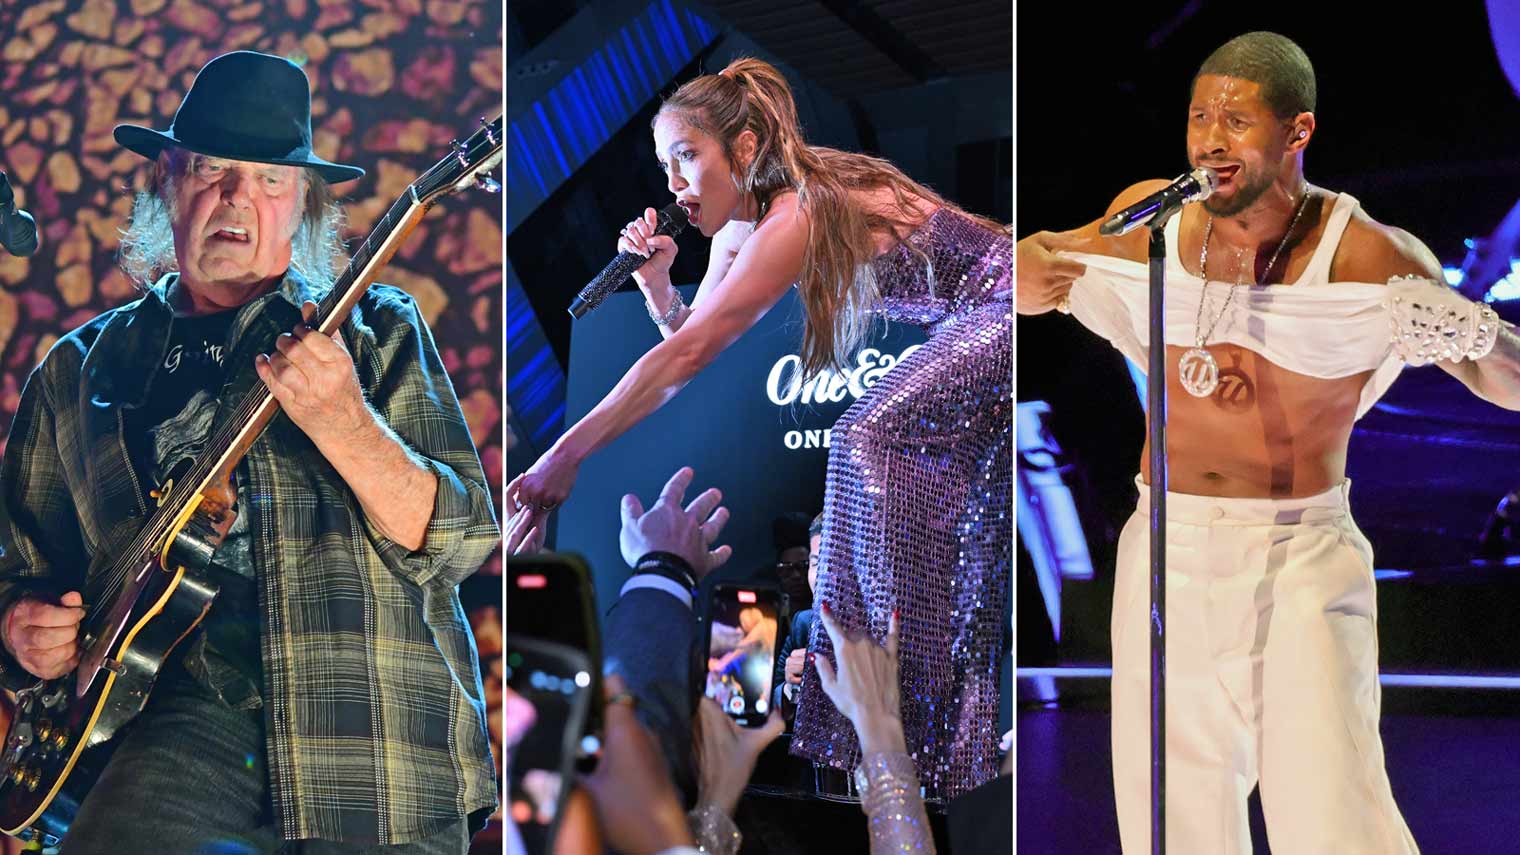 A three panel photo of, left to right, Neil Young, Jennifer Lopez and Usher performing.